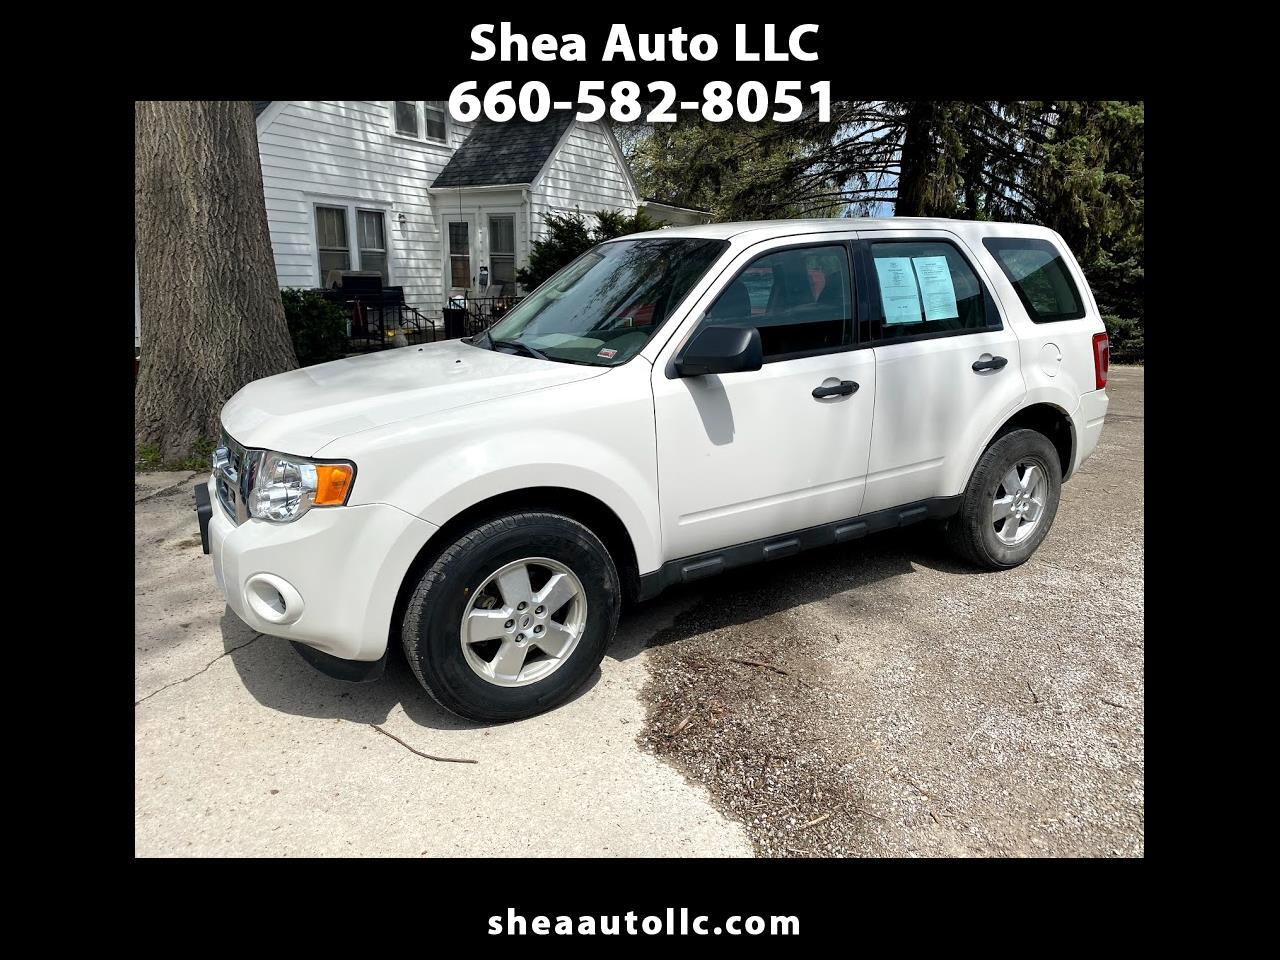 Used 2012 Ford Escape XLS FWD for Sale in Maryville MO 64468 Shea Auto LLC